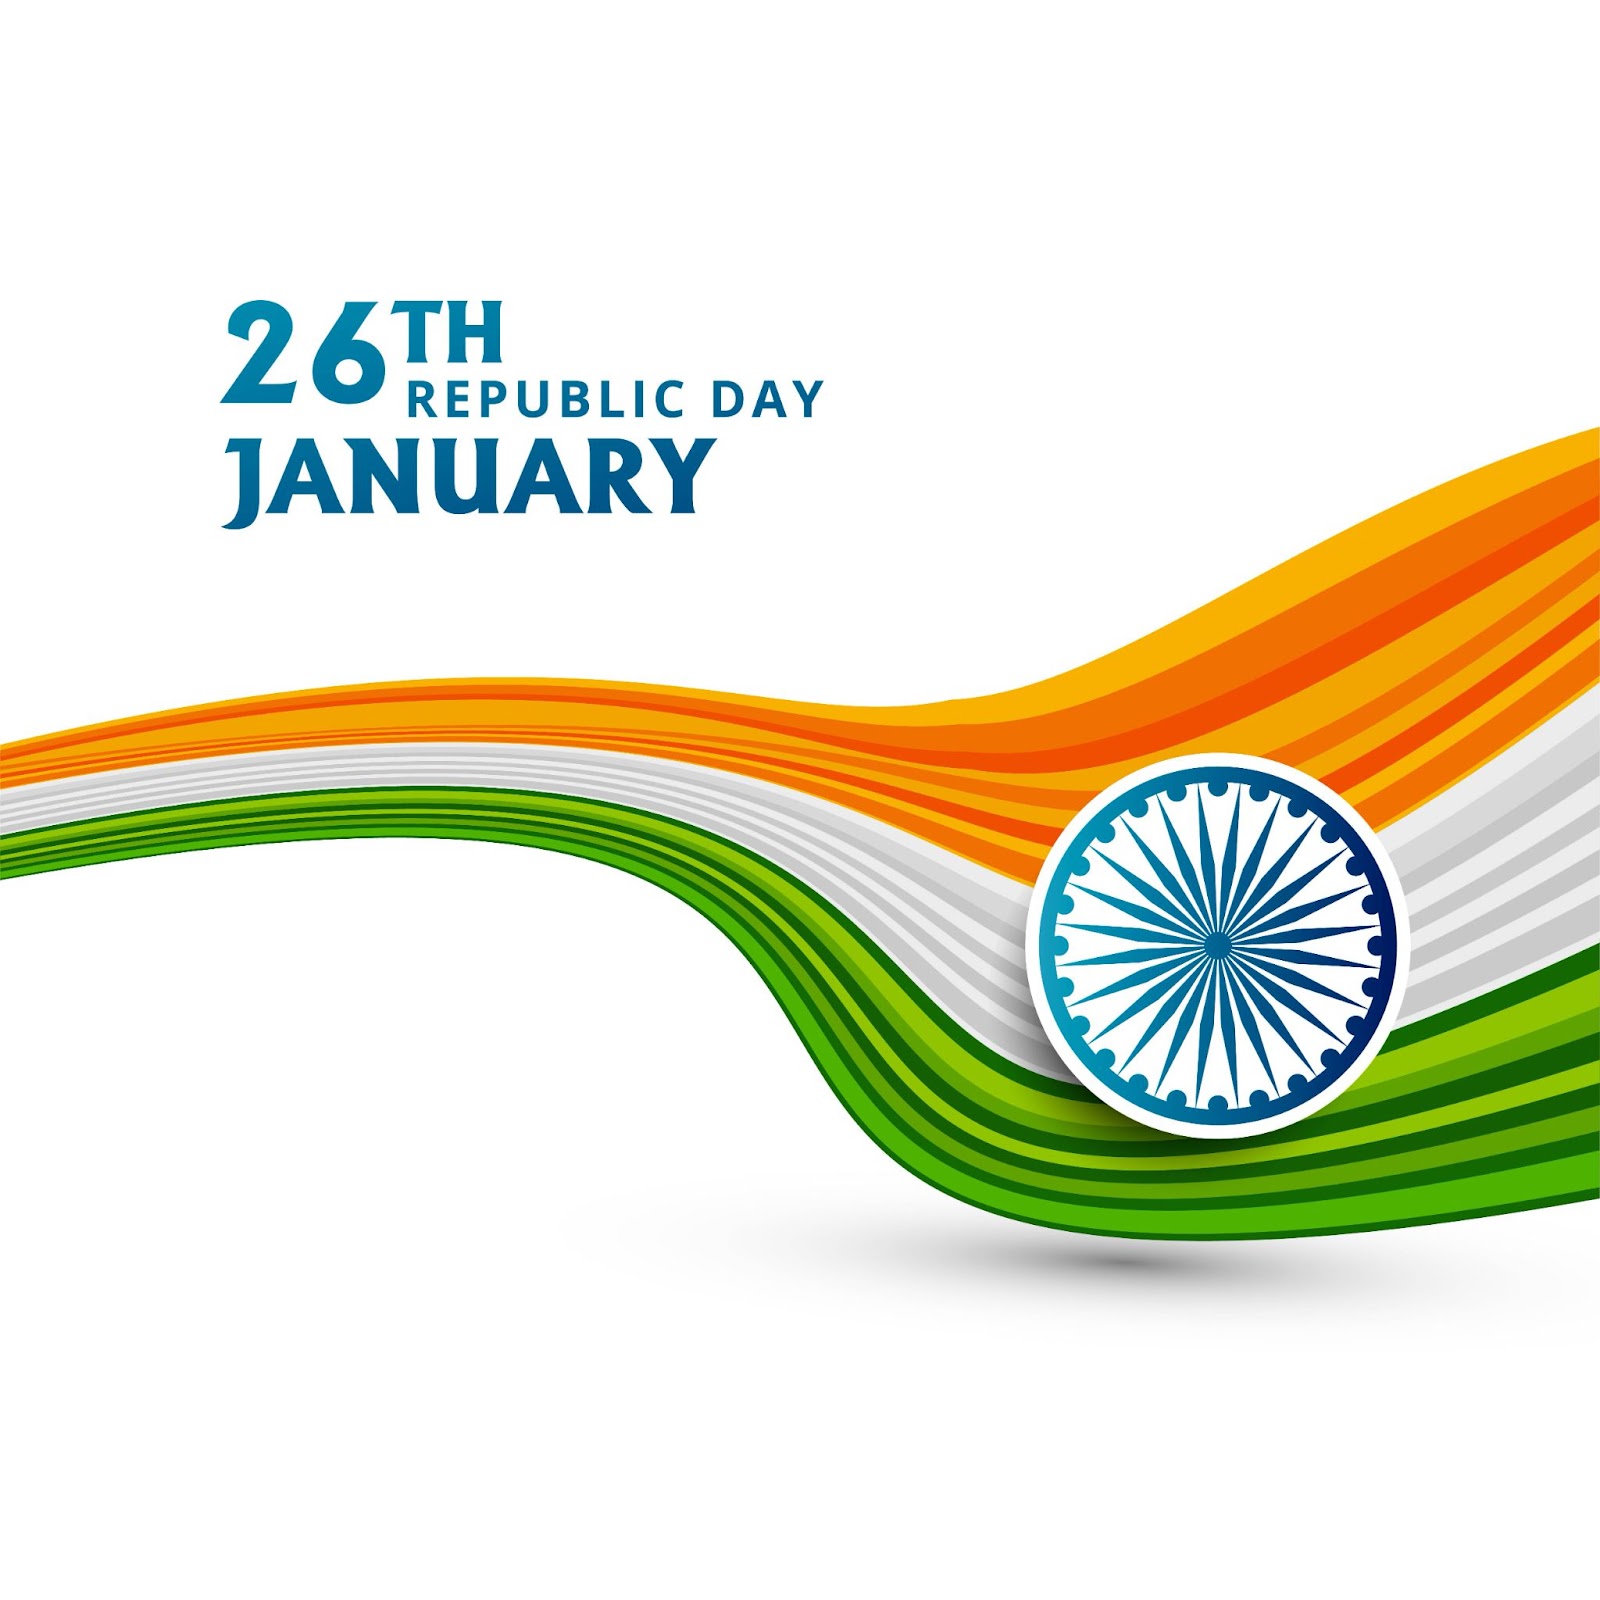 Republic day captions in English